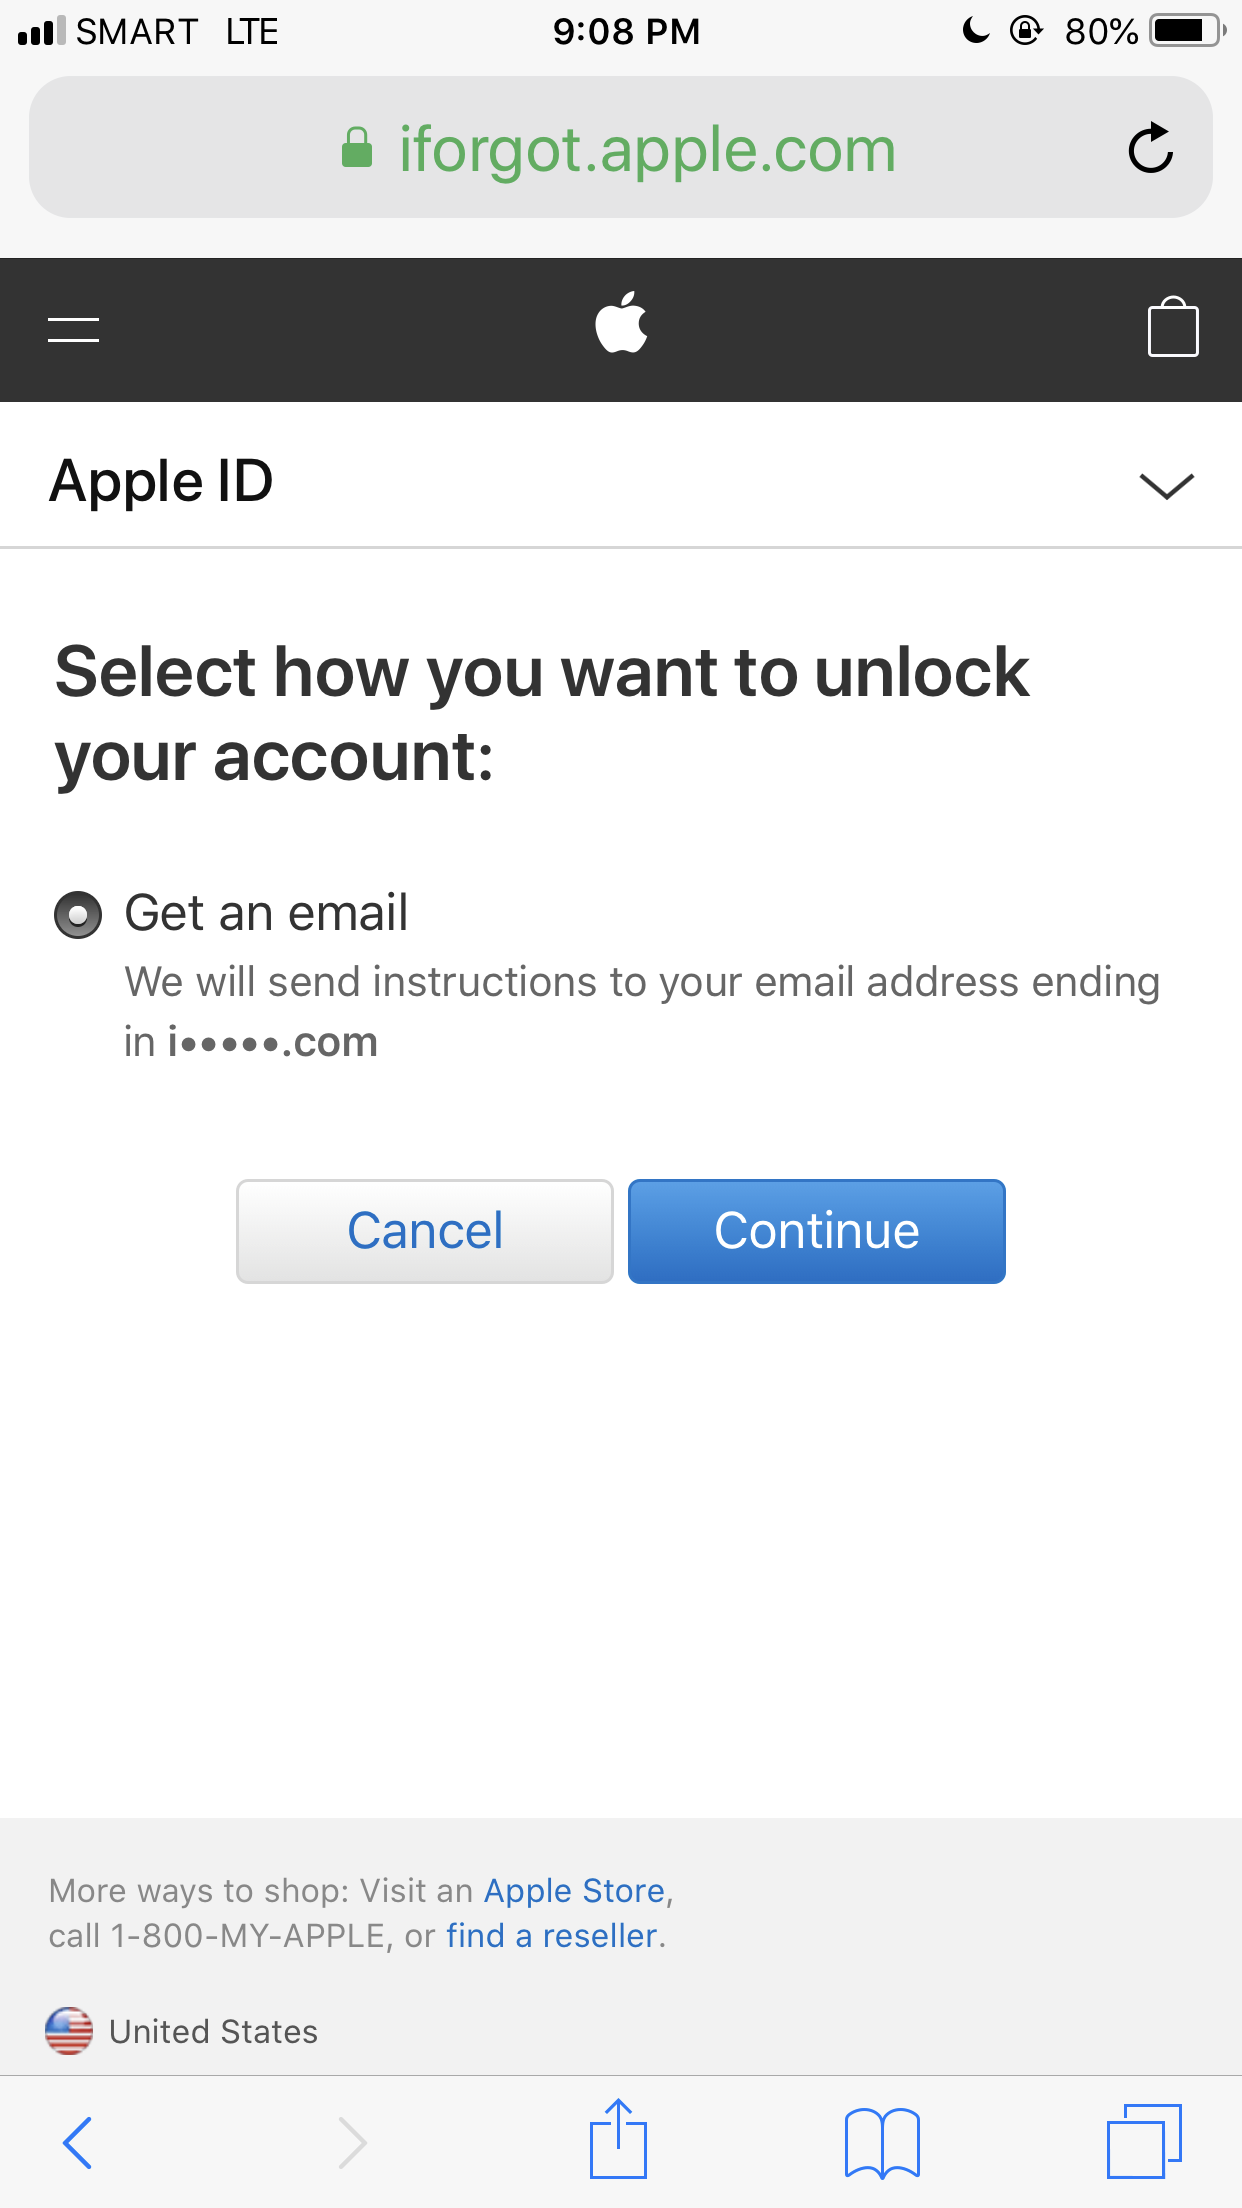 Can I recover my Gmail from Apple ID?